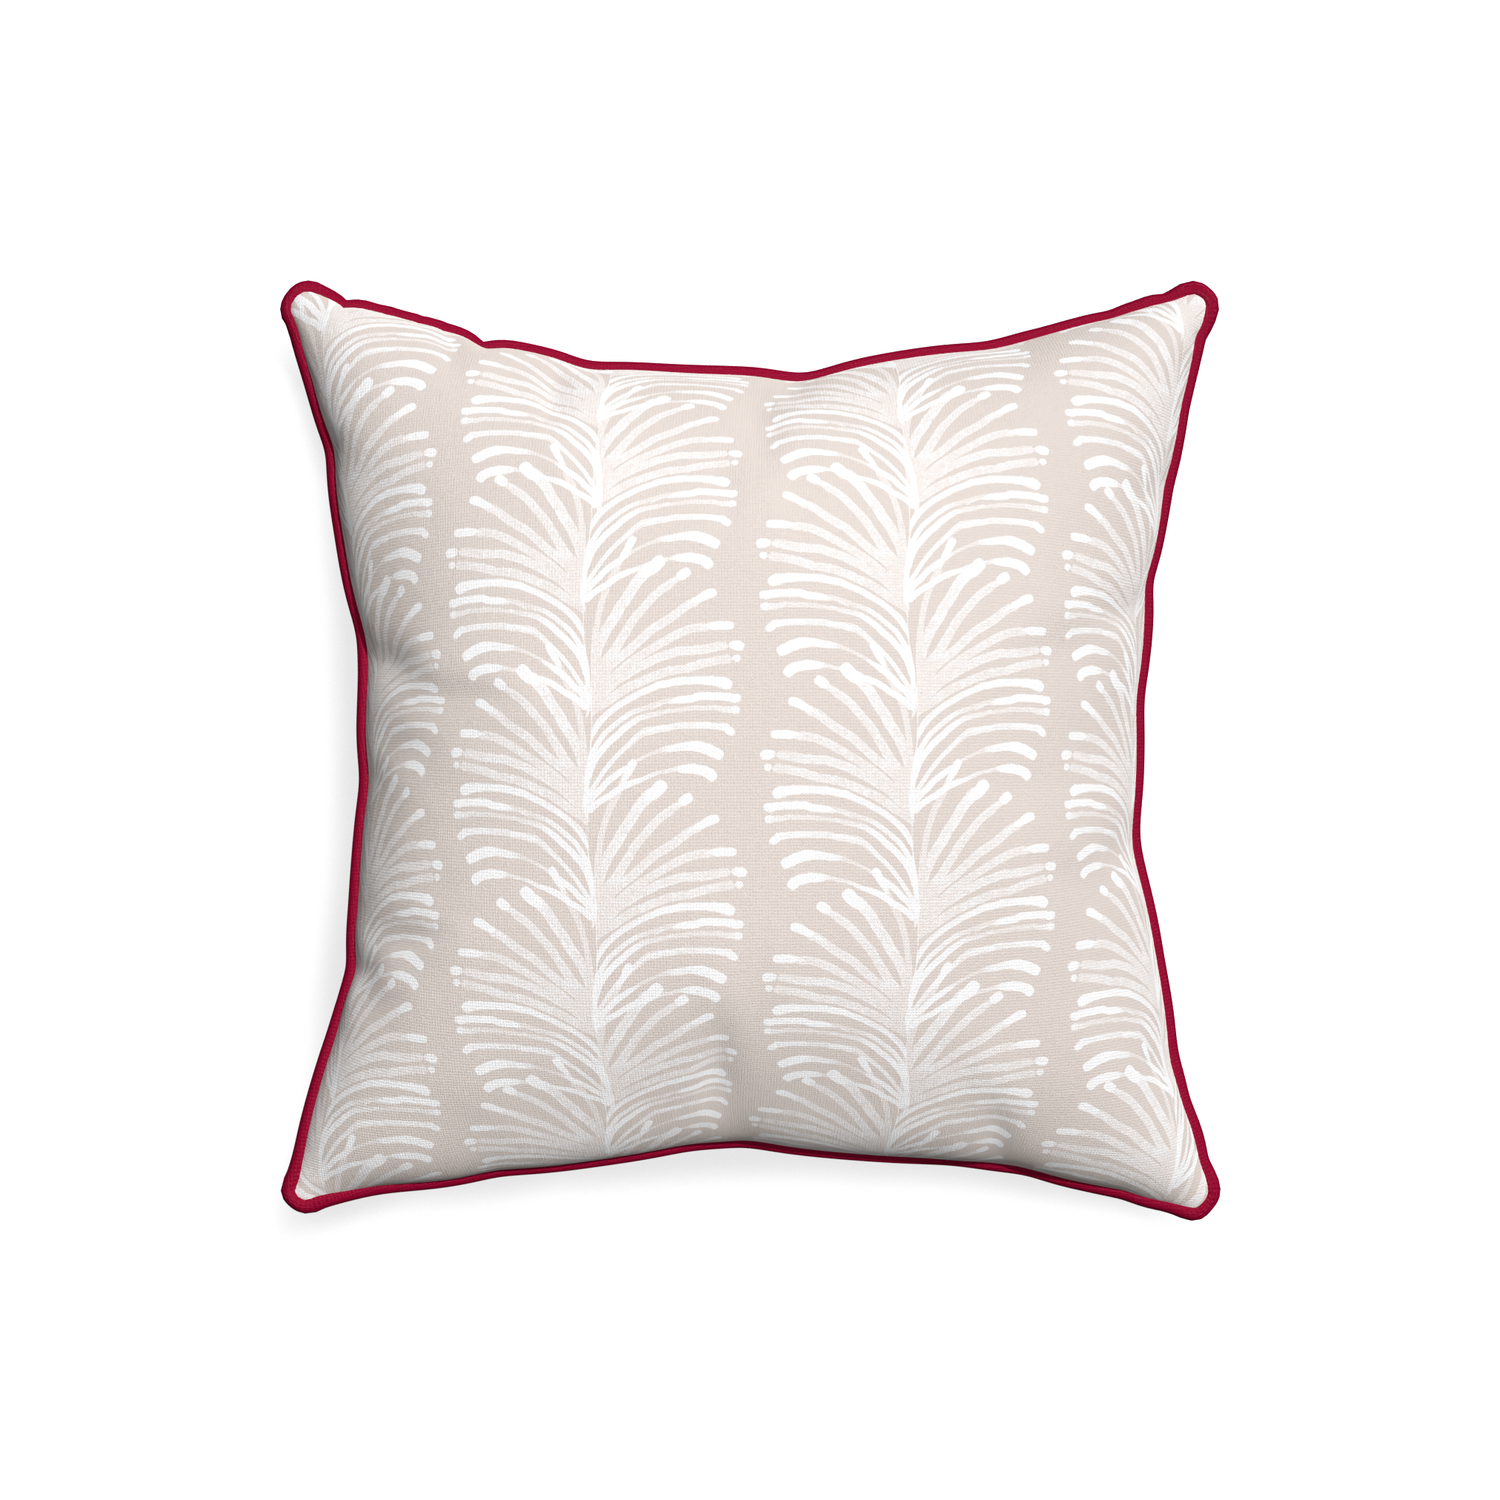 20-square emma sand custom pillow with raspberry piping on white background